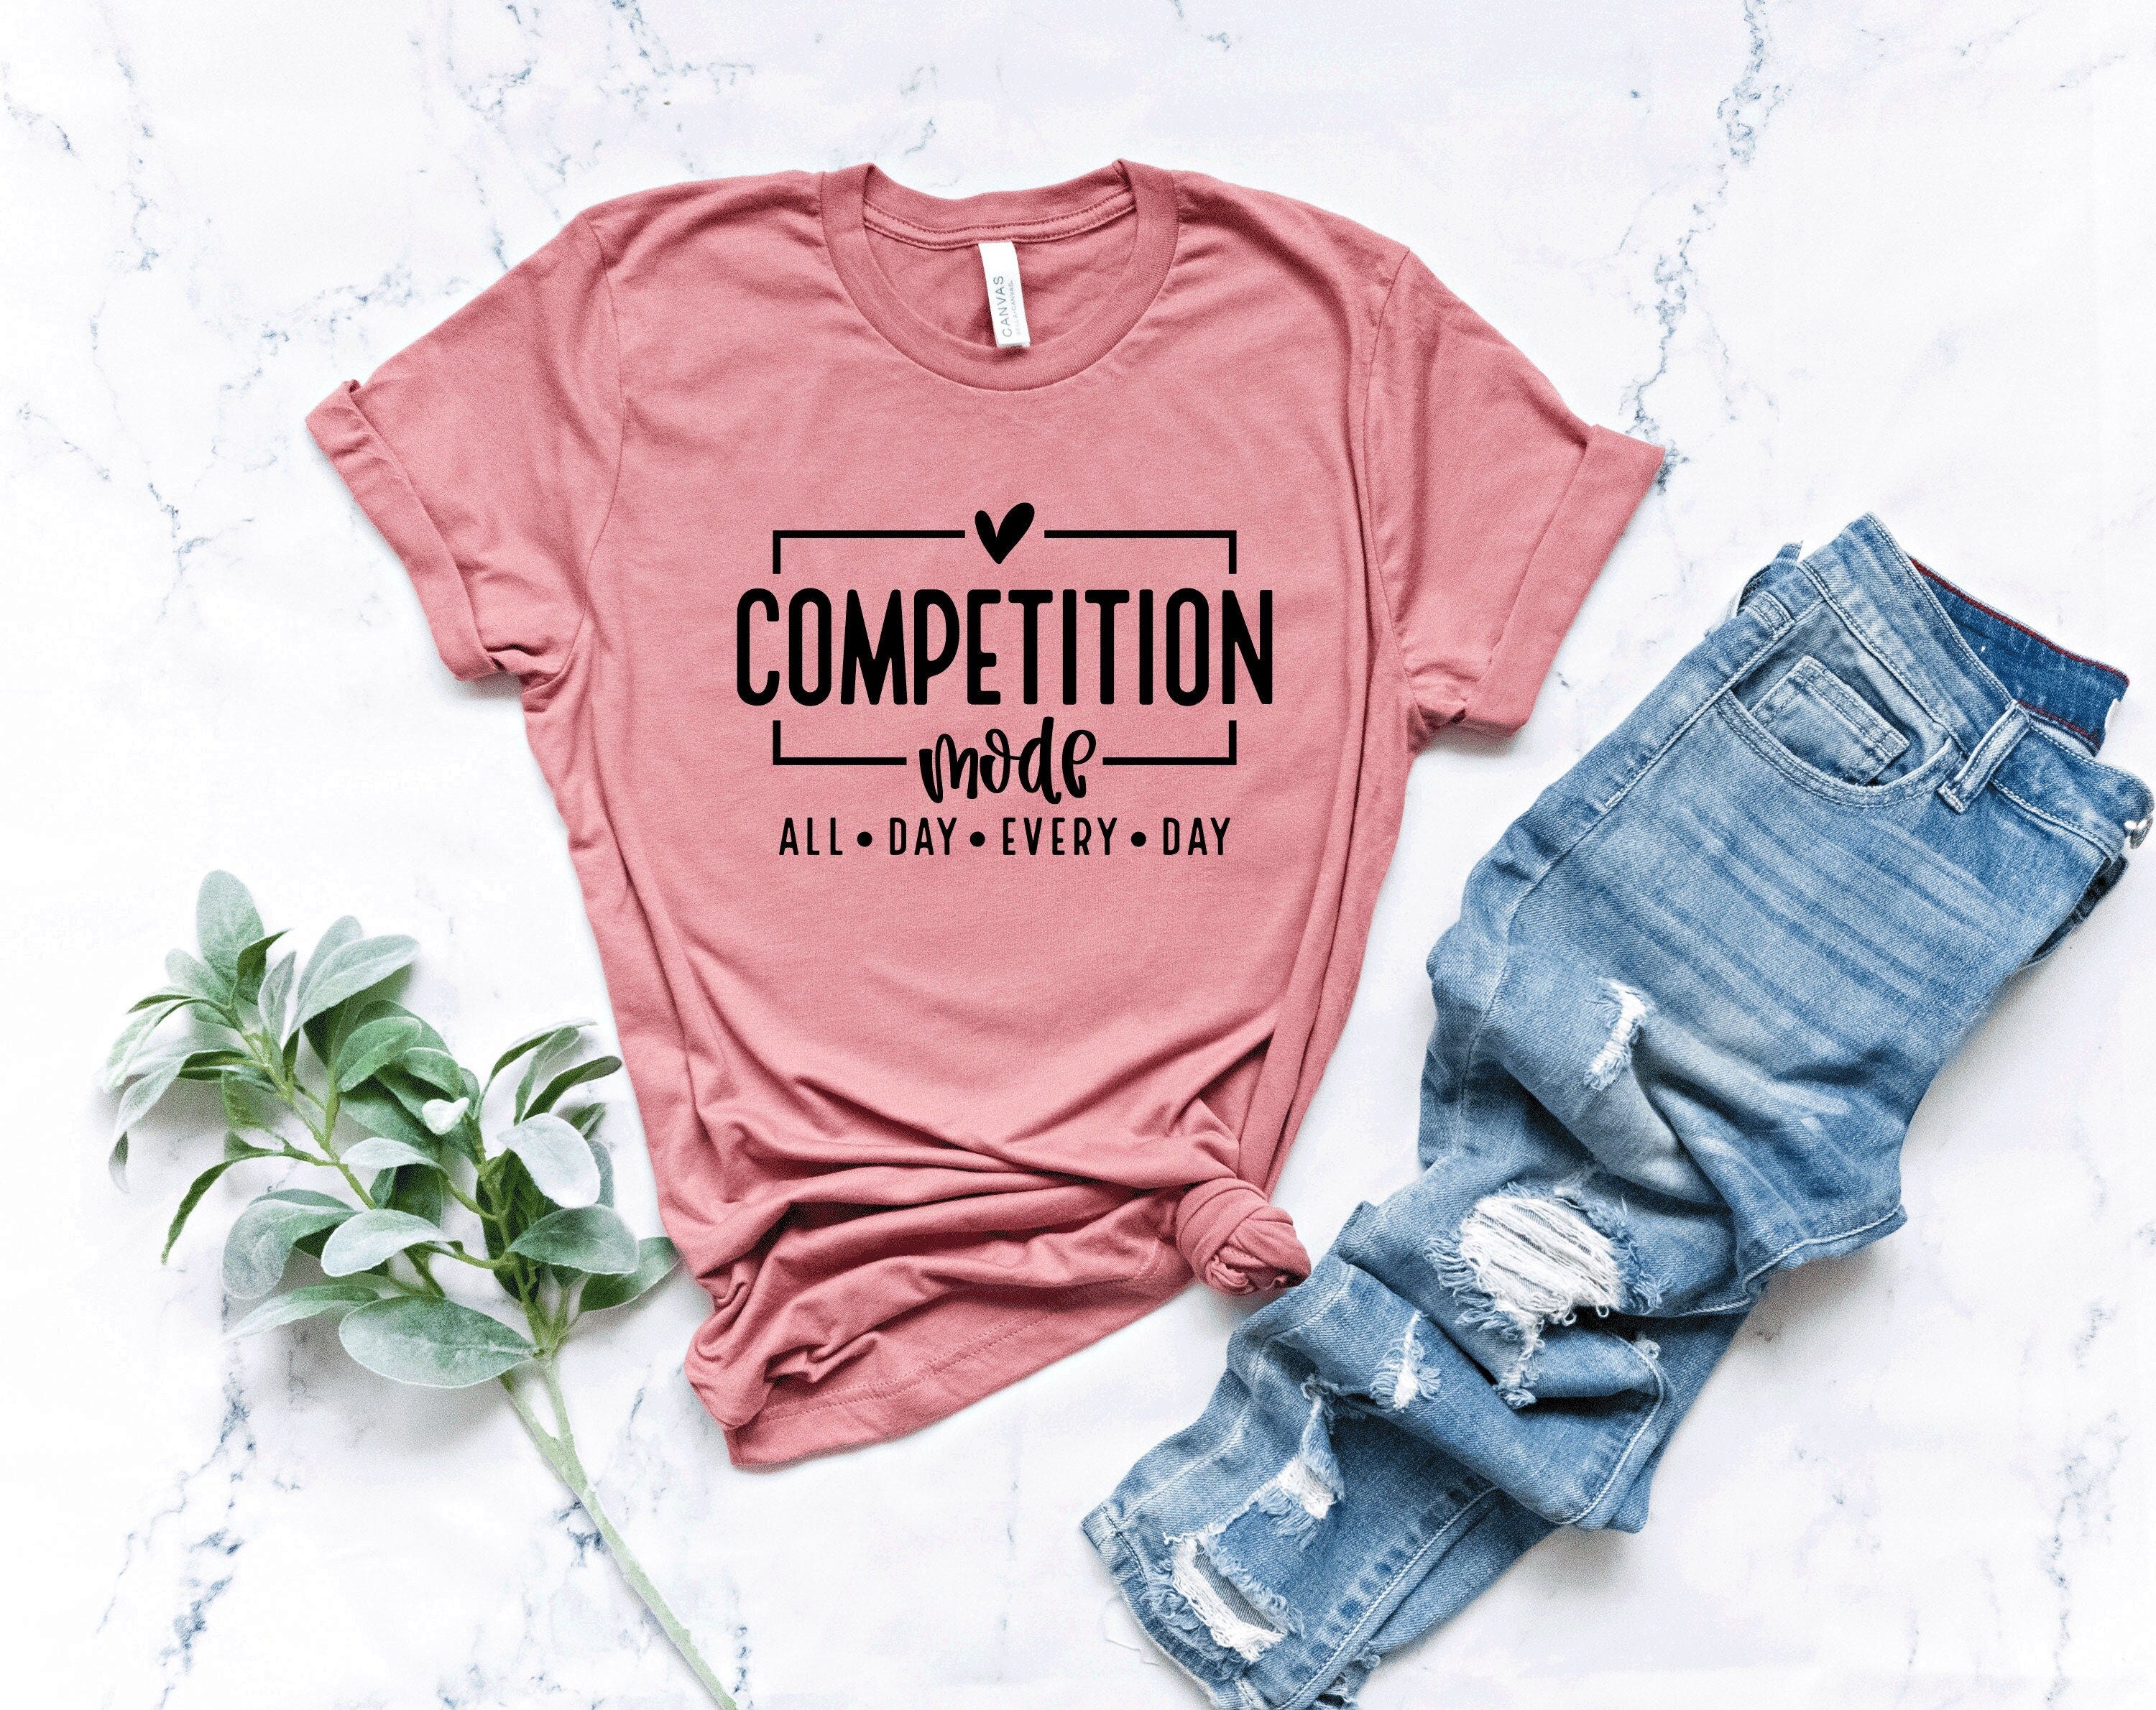 Competition Mode Shirt, Game Day Vibes Shirt, Mom Mode Shirt, Cheerleader Shirt, Dance Competition, Cheer Shirt, Cheerleading Shirt